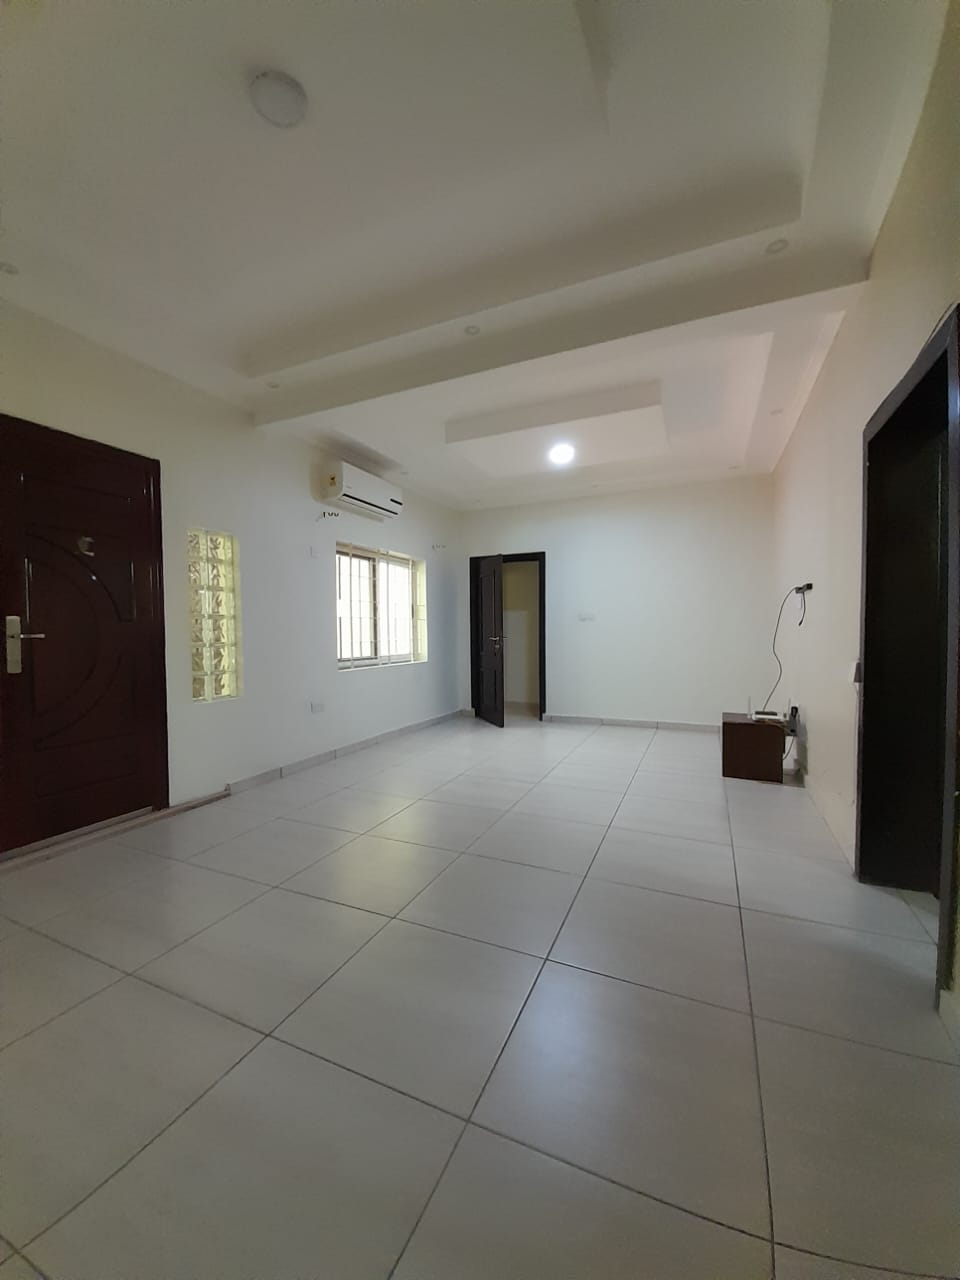 Two 2-Bedroom Unfurnished Apartment for Rent at Labone